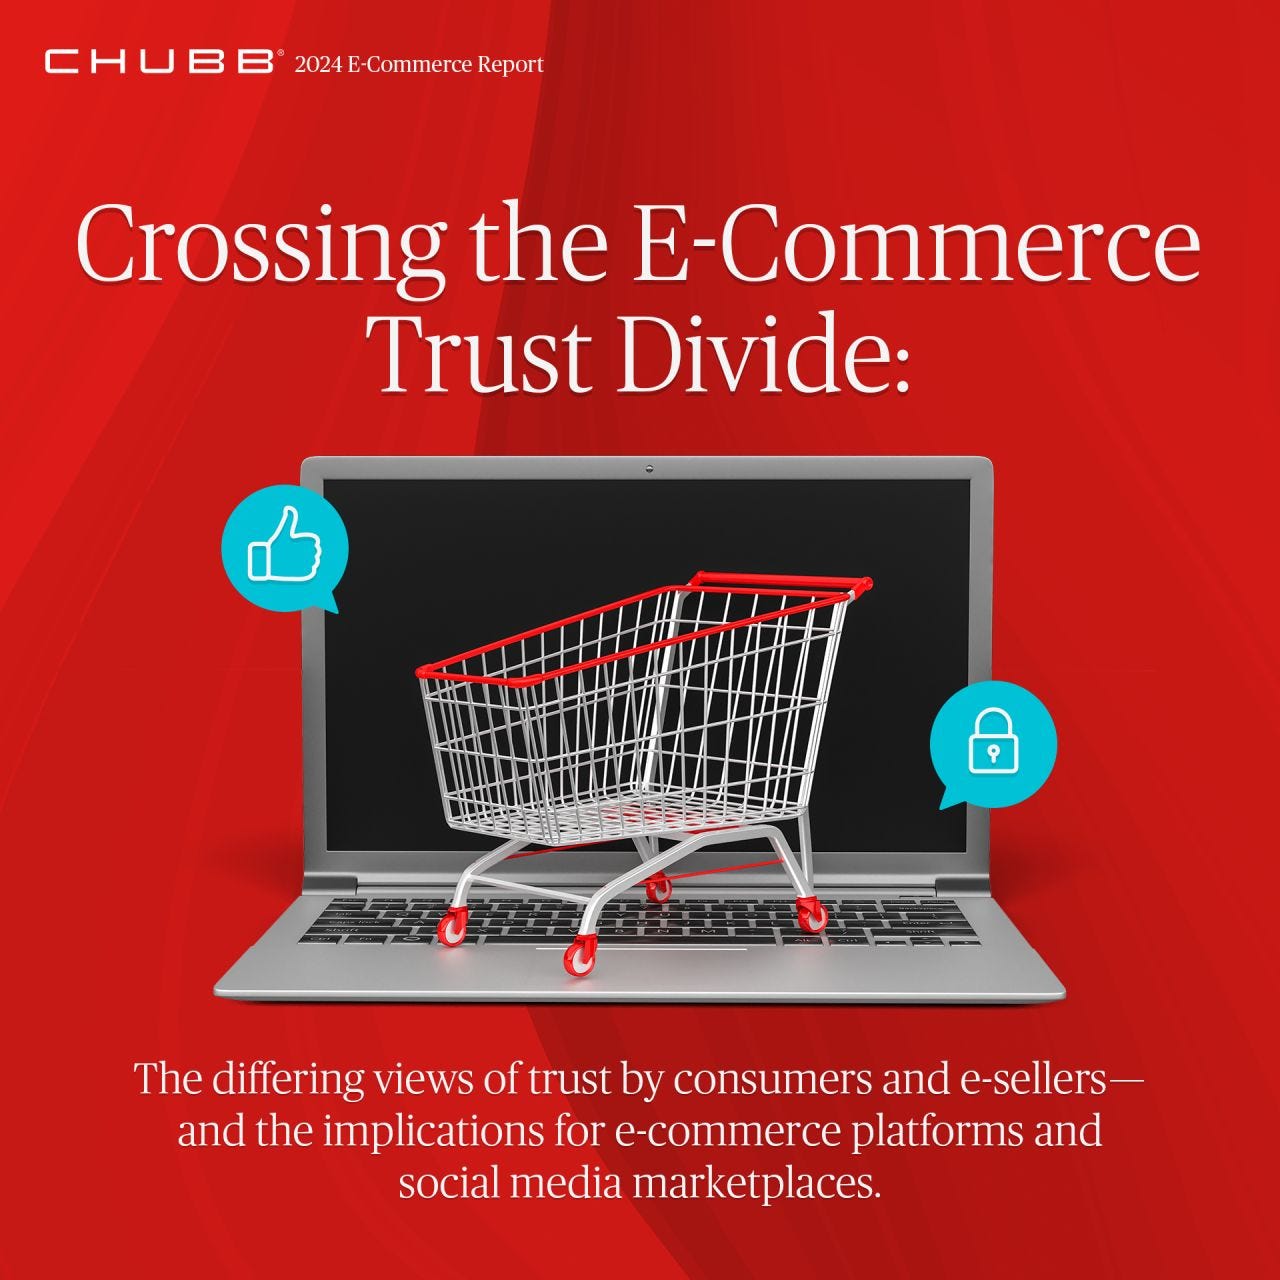 Chubb global report:  “Crossing the E-Commerce Trust Divide,” which delves into the differing views of trust by consumers and e-sellers.